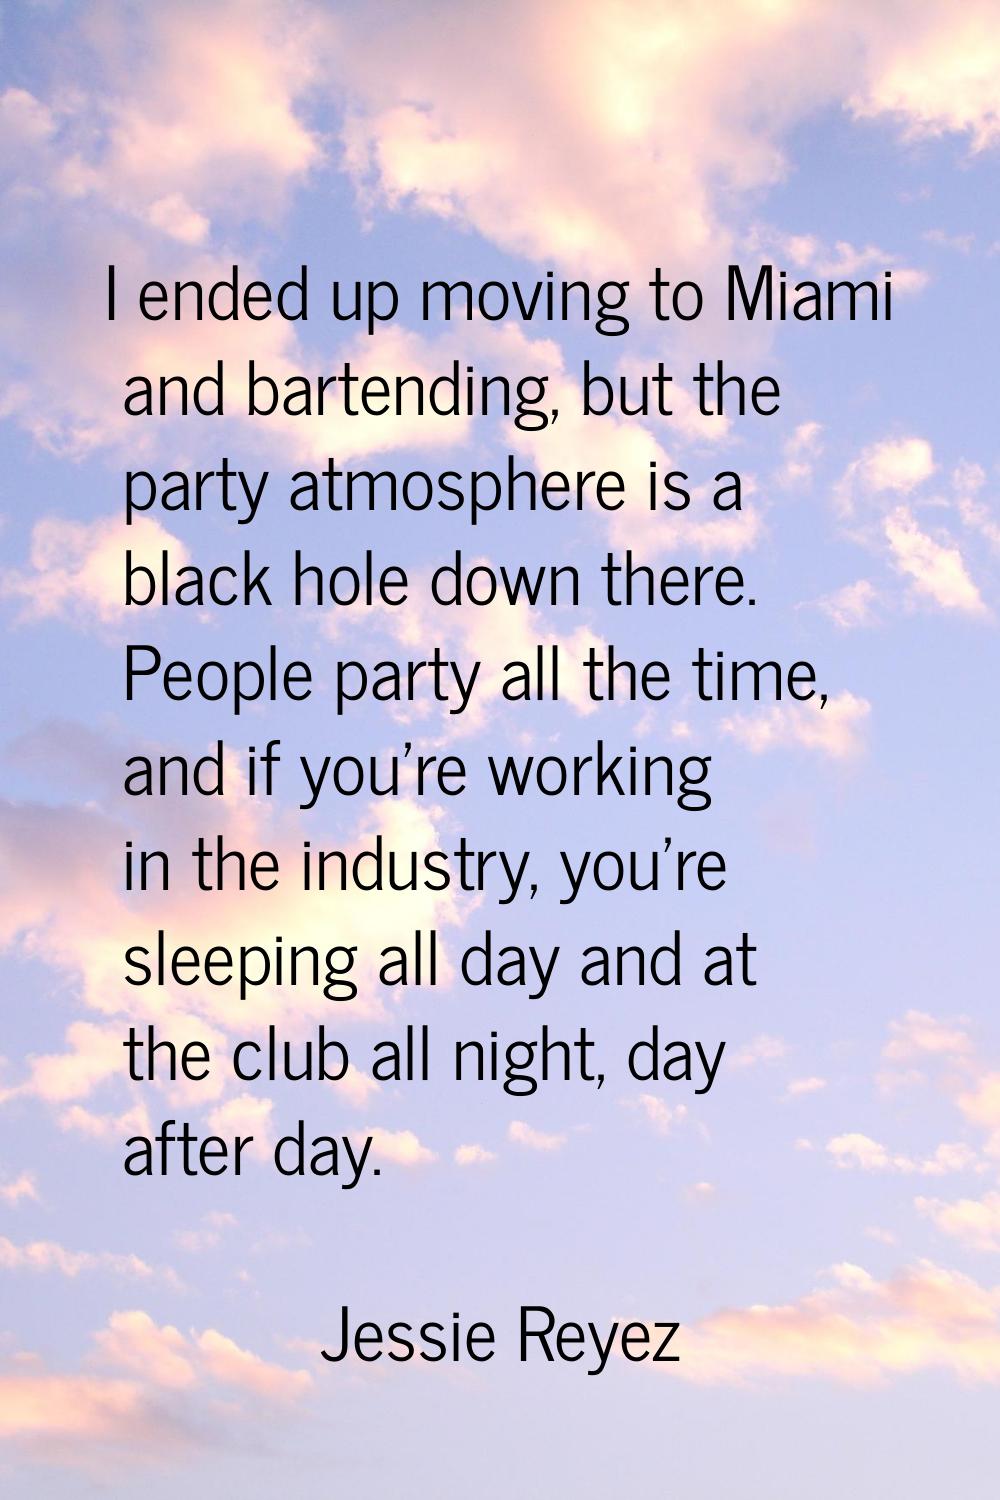 I ended up moving to Miami and bartending, but the party atmosphere is a black hole down there. Peo